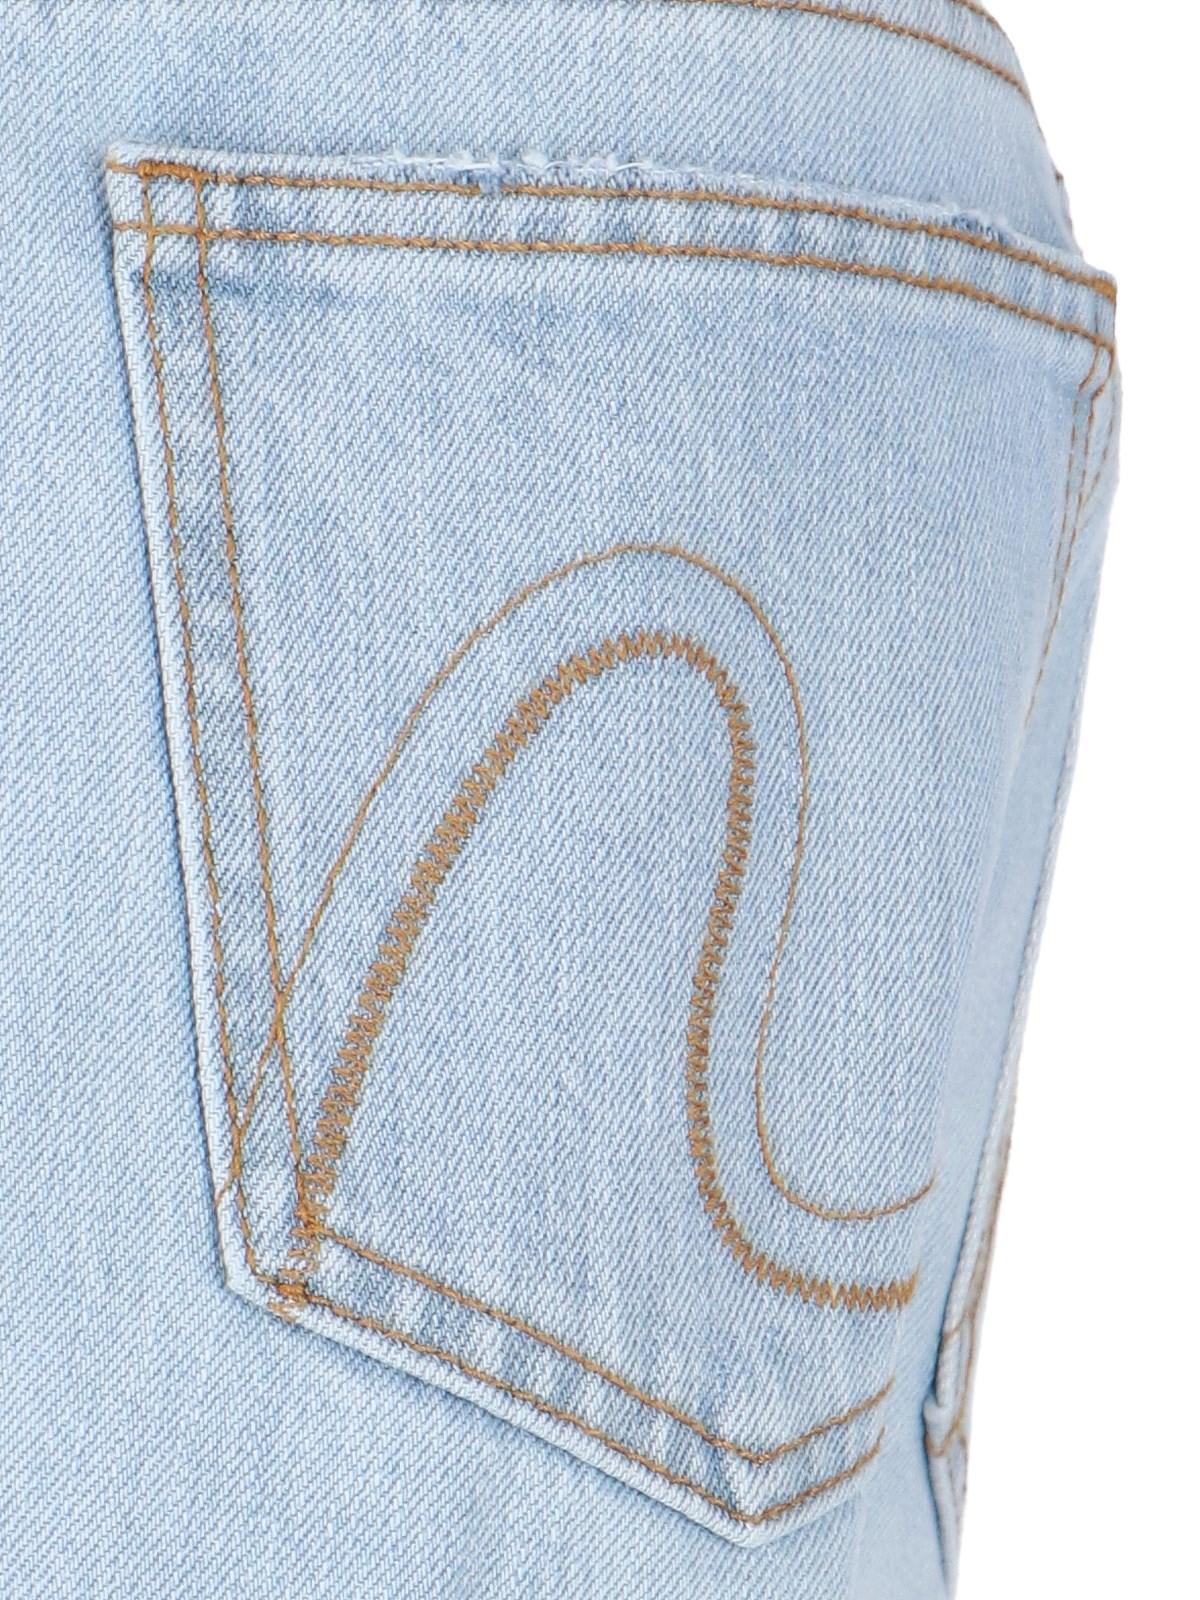 Shop Erl Bootcut Jeans In Light Blue